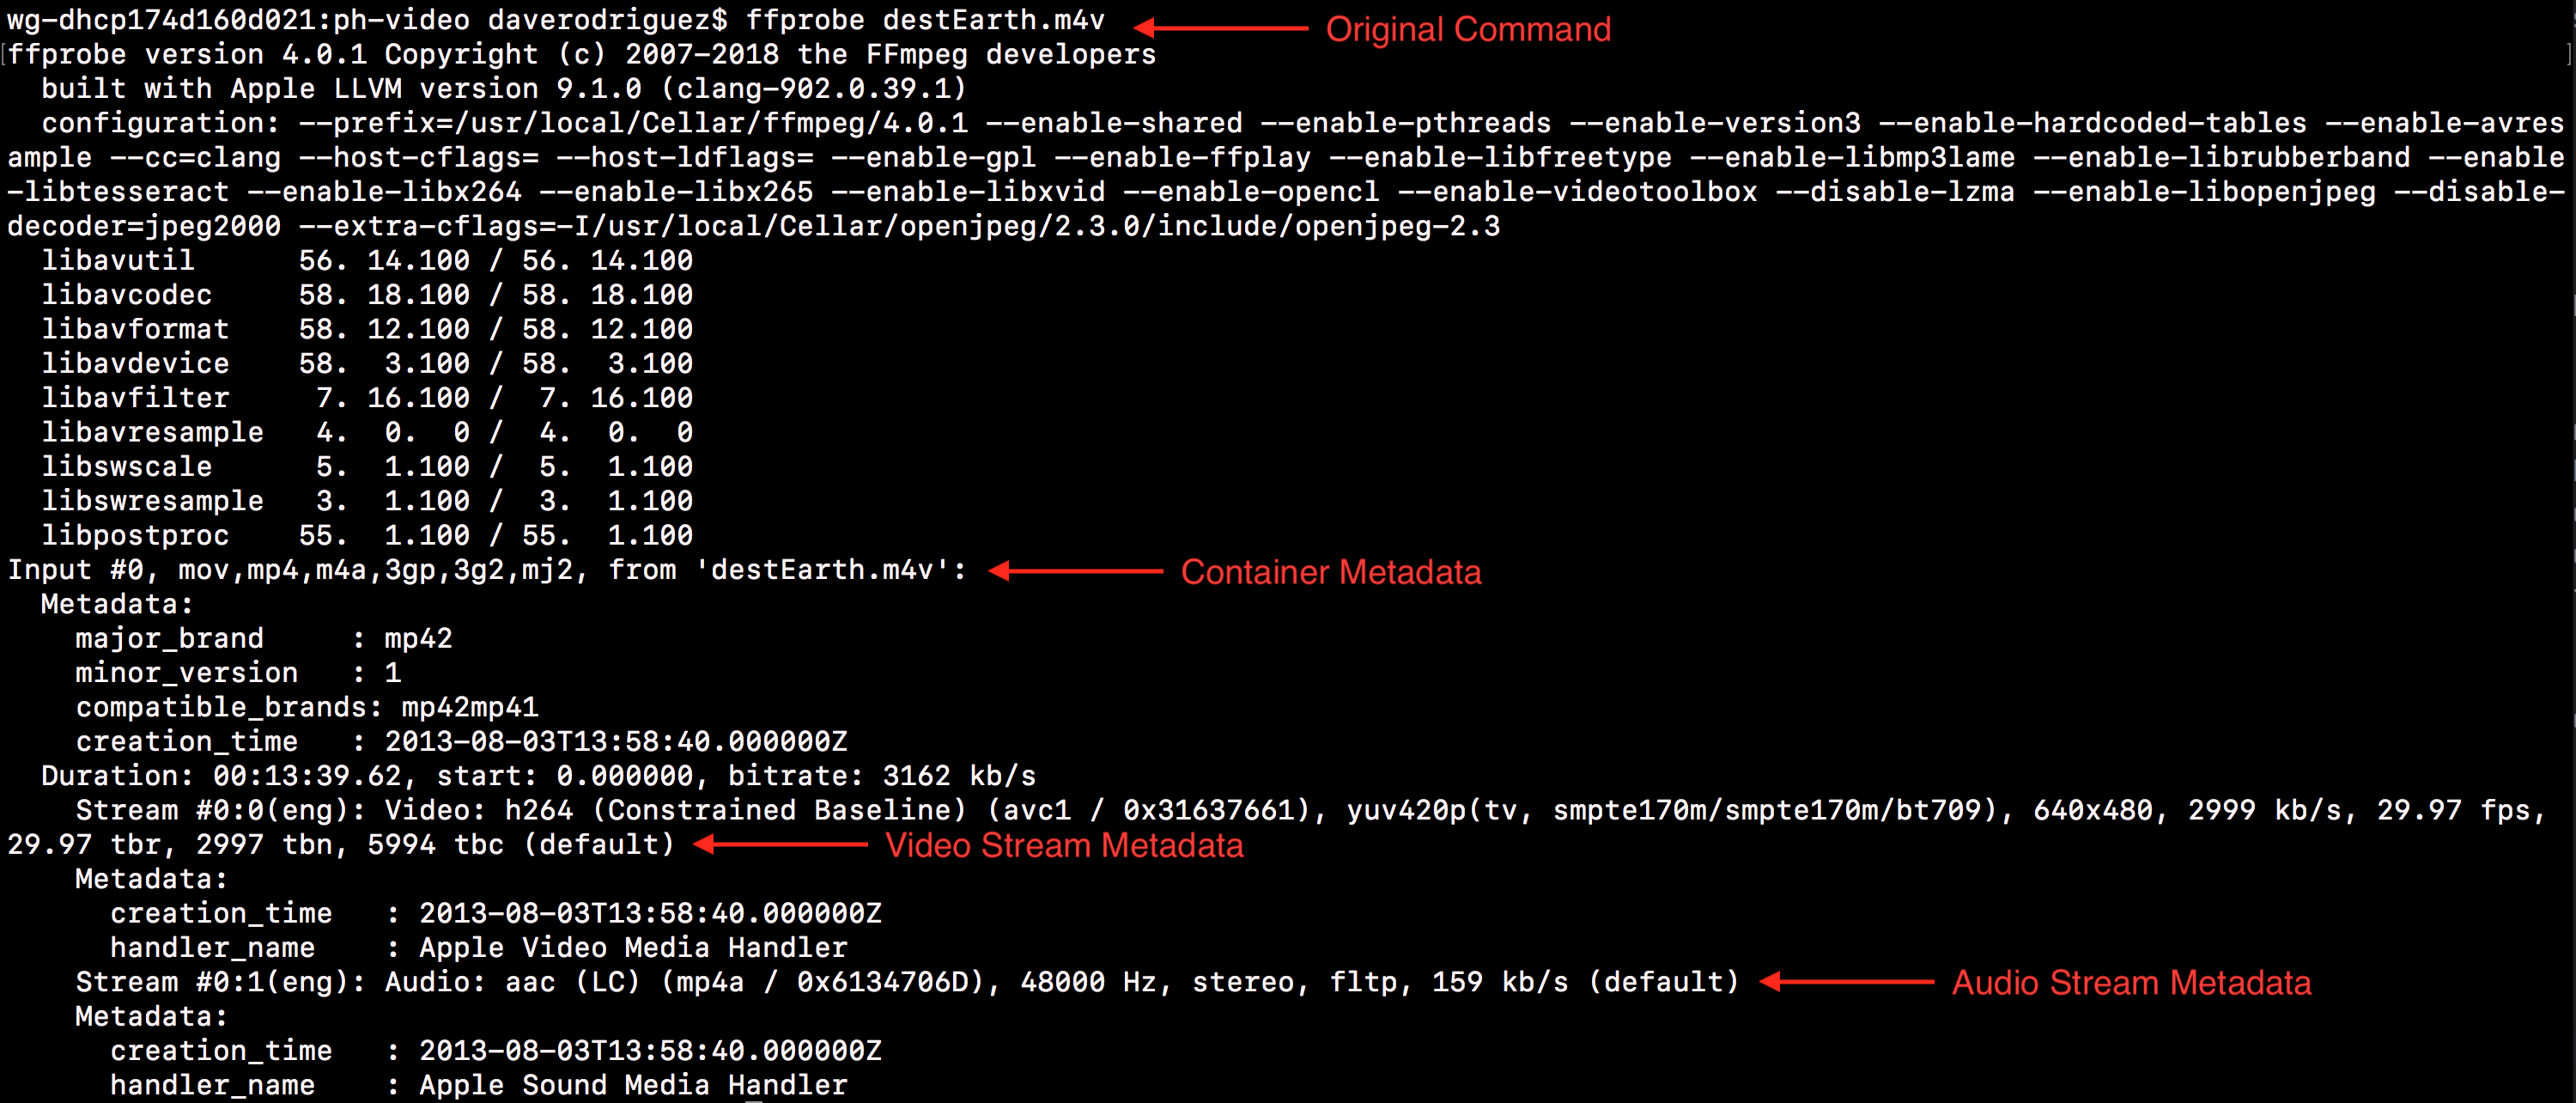 The output of a basic `ffprobe` command with destEarth.m4v